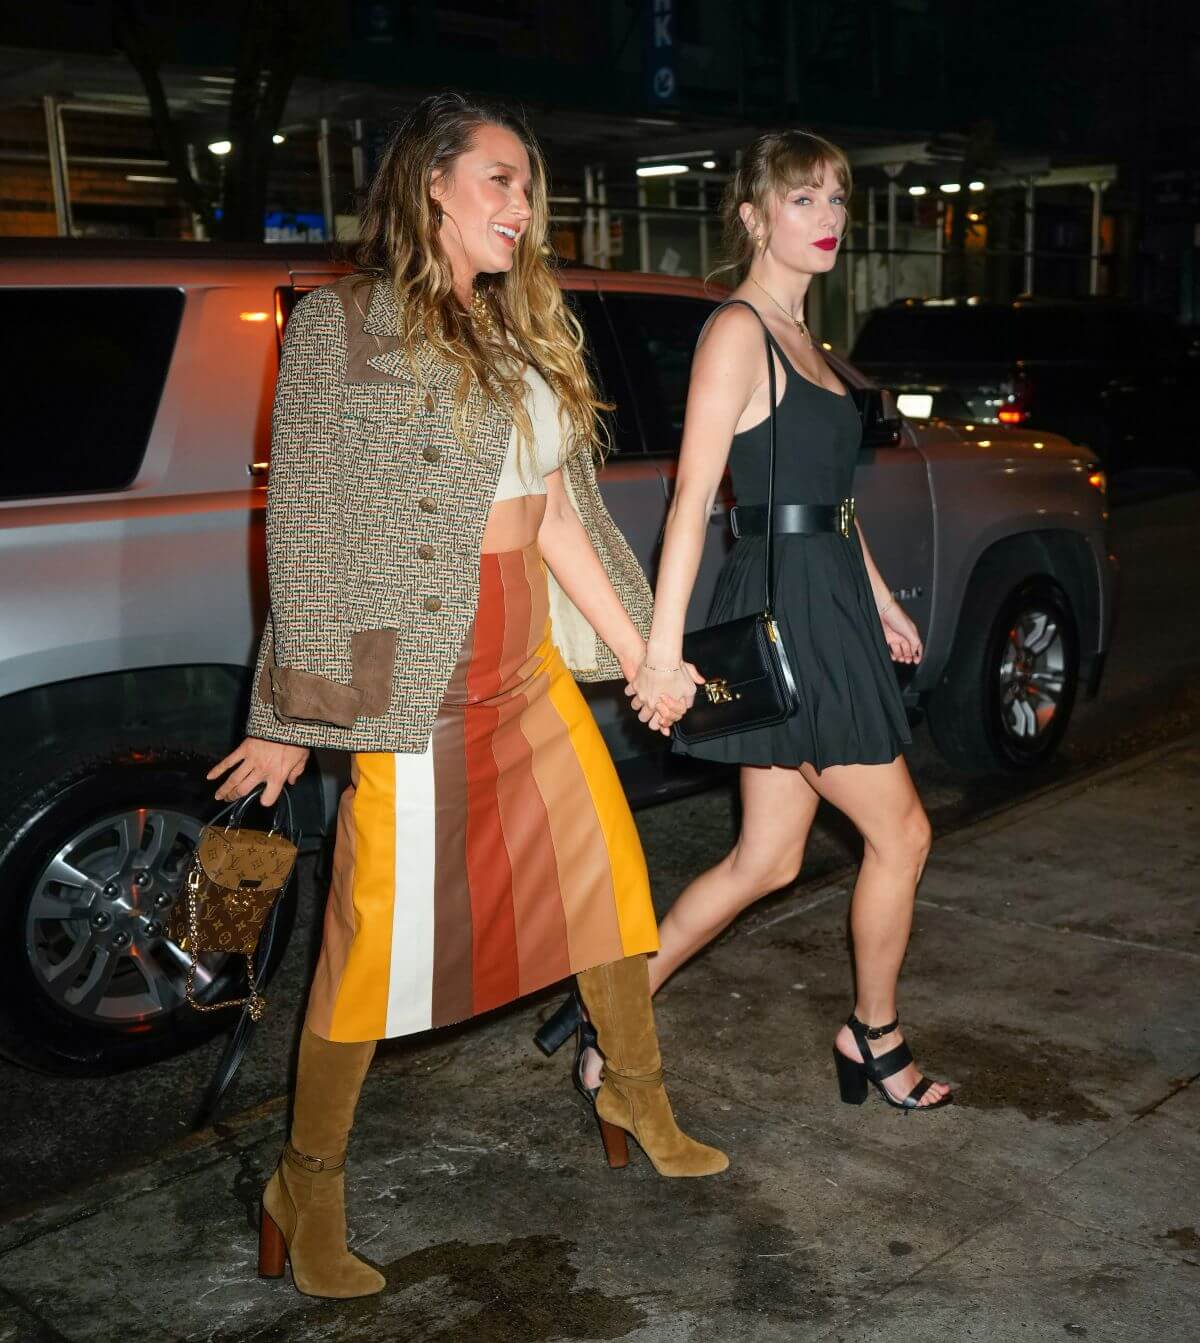 Blake Lively and Taylor Swift are seen out together in New York City